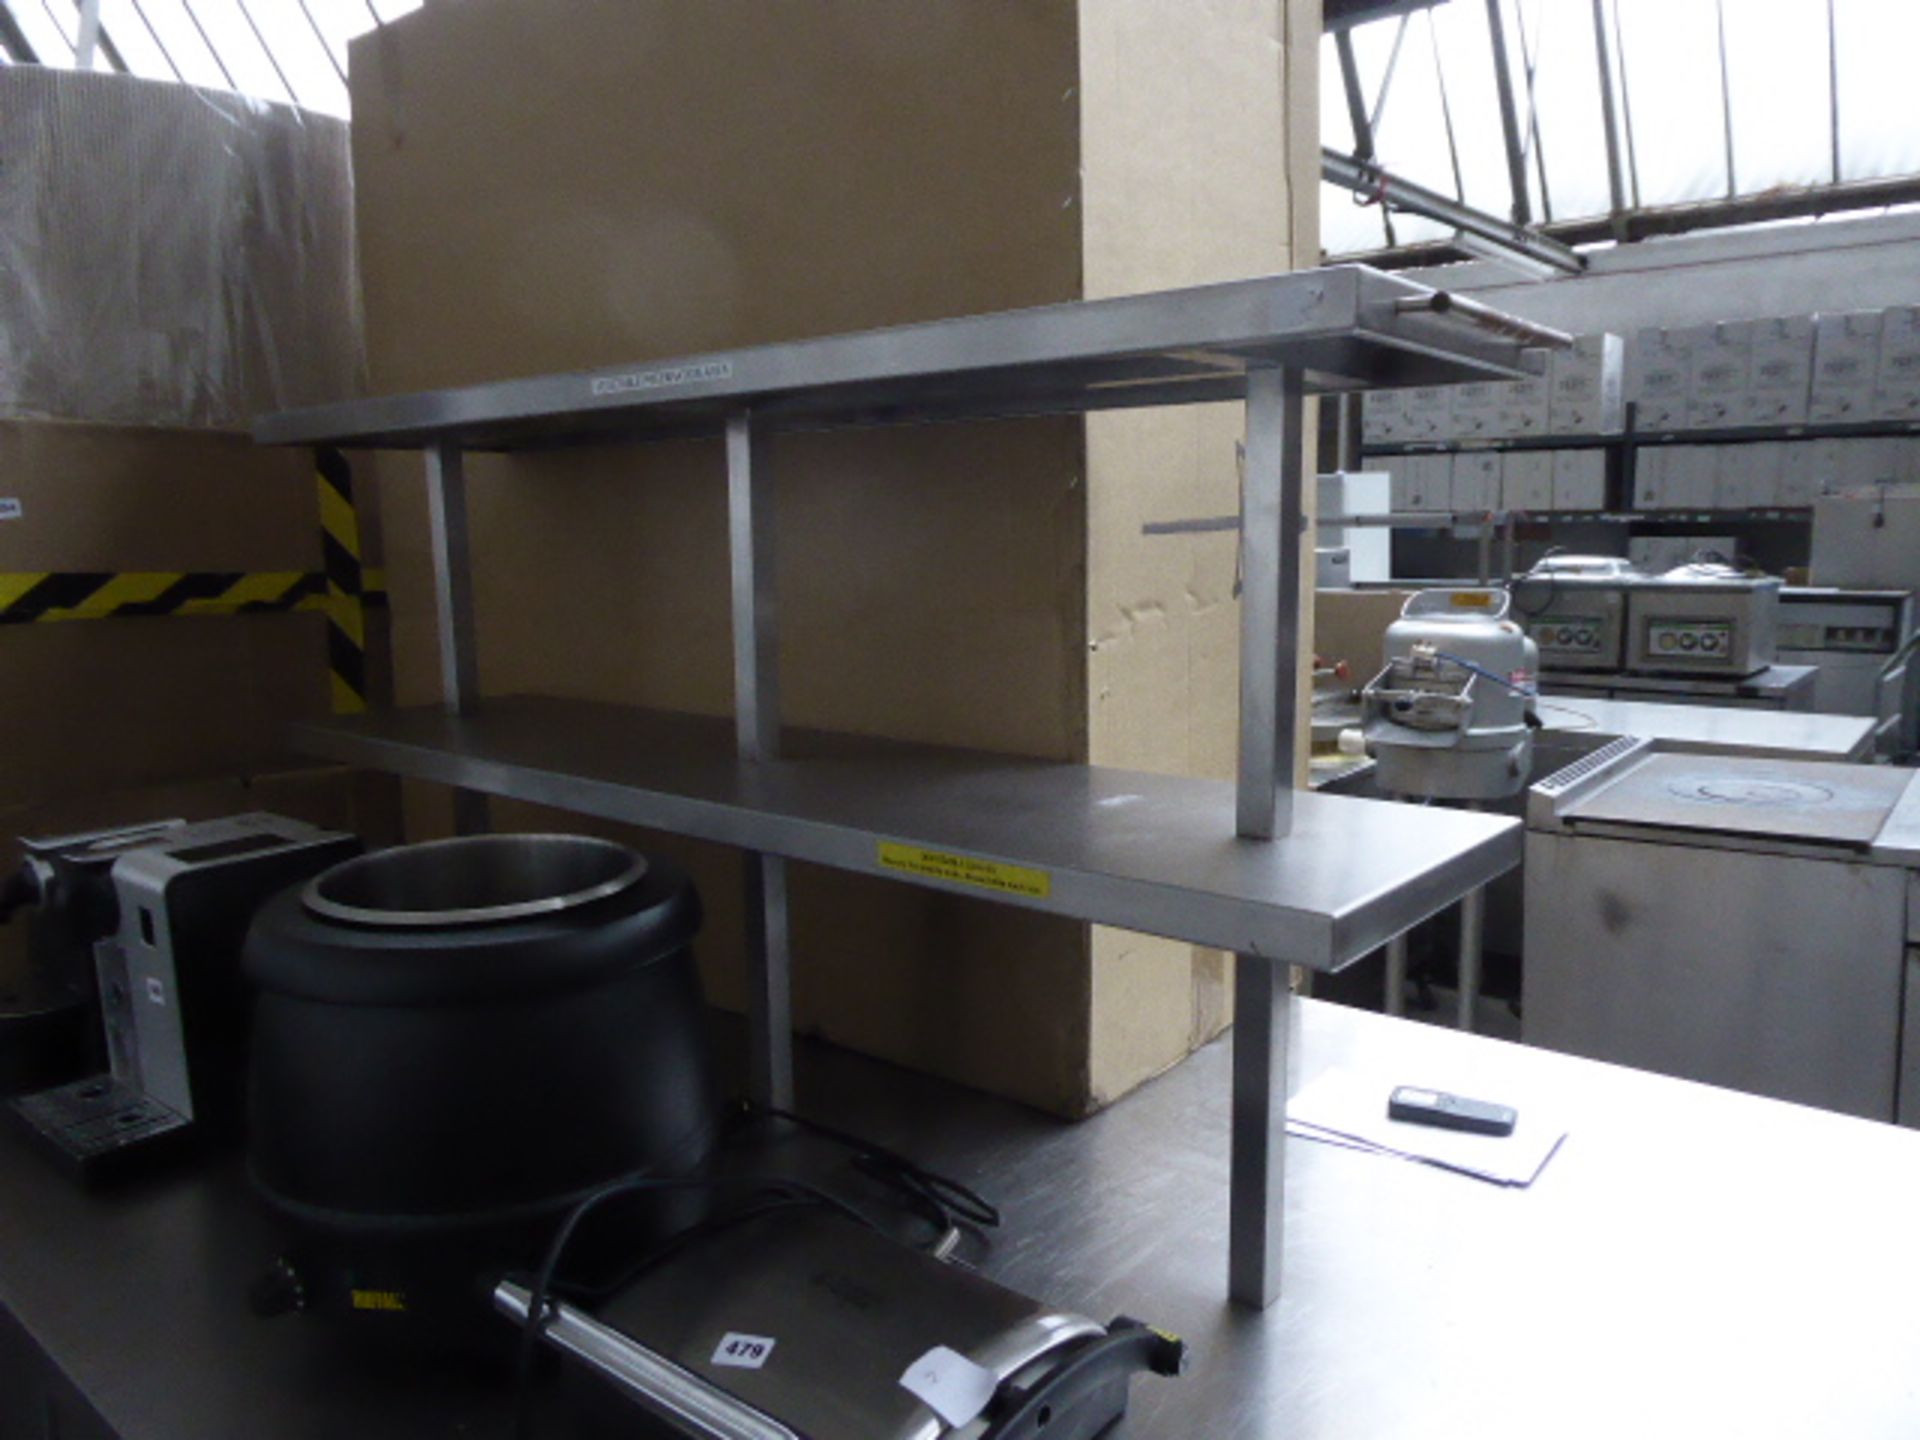 17 - 190cm wide x 120cm deep bespoke built stainless steel island for food preparation with 2 - Image 3 of 3